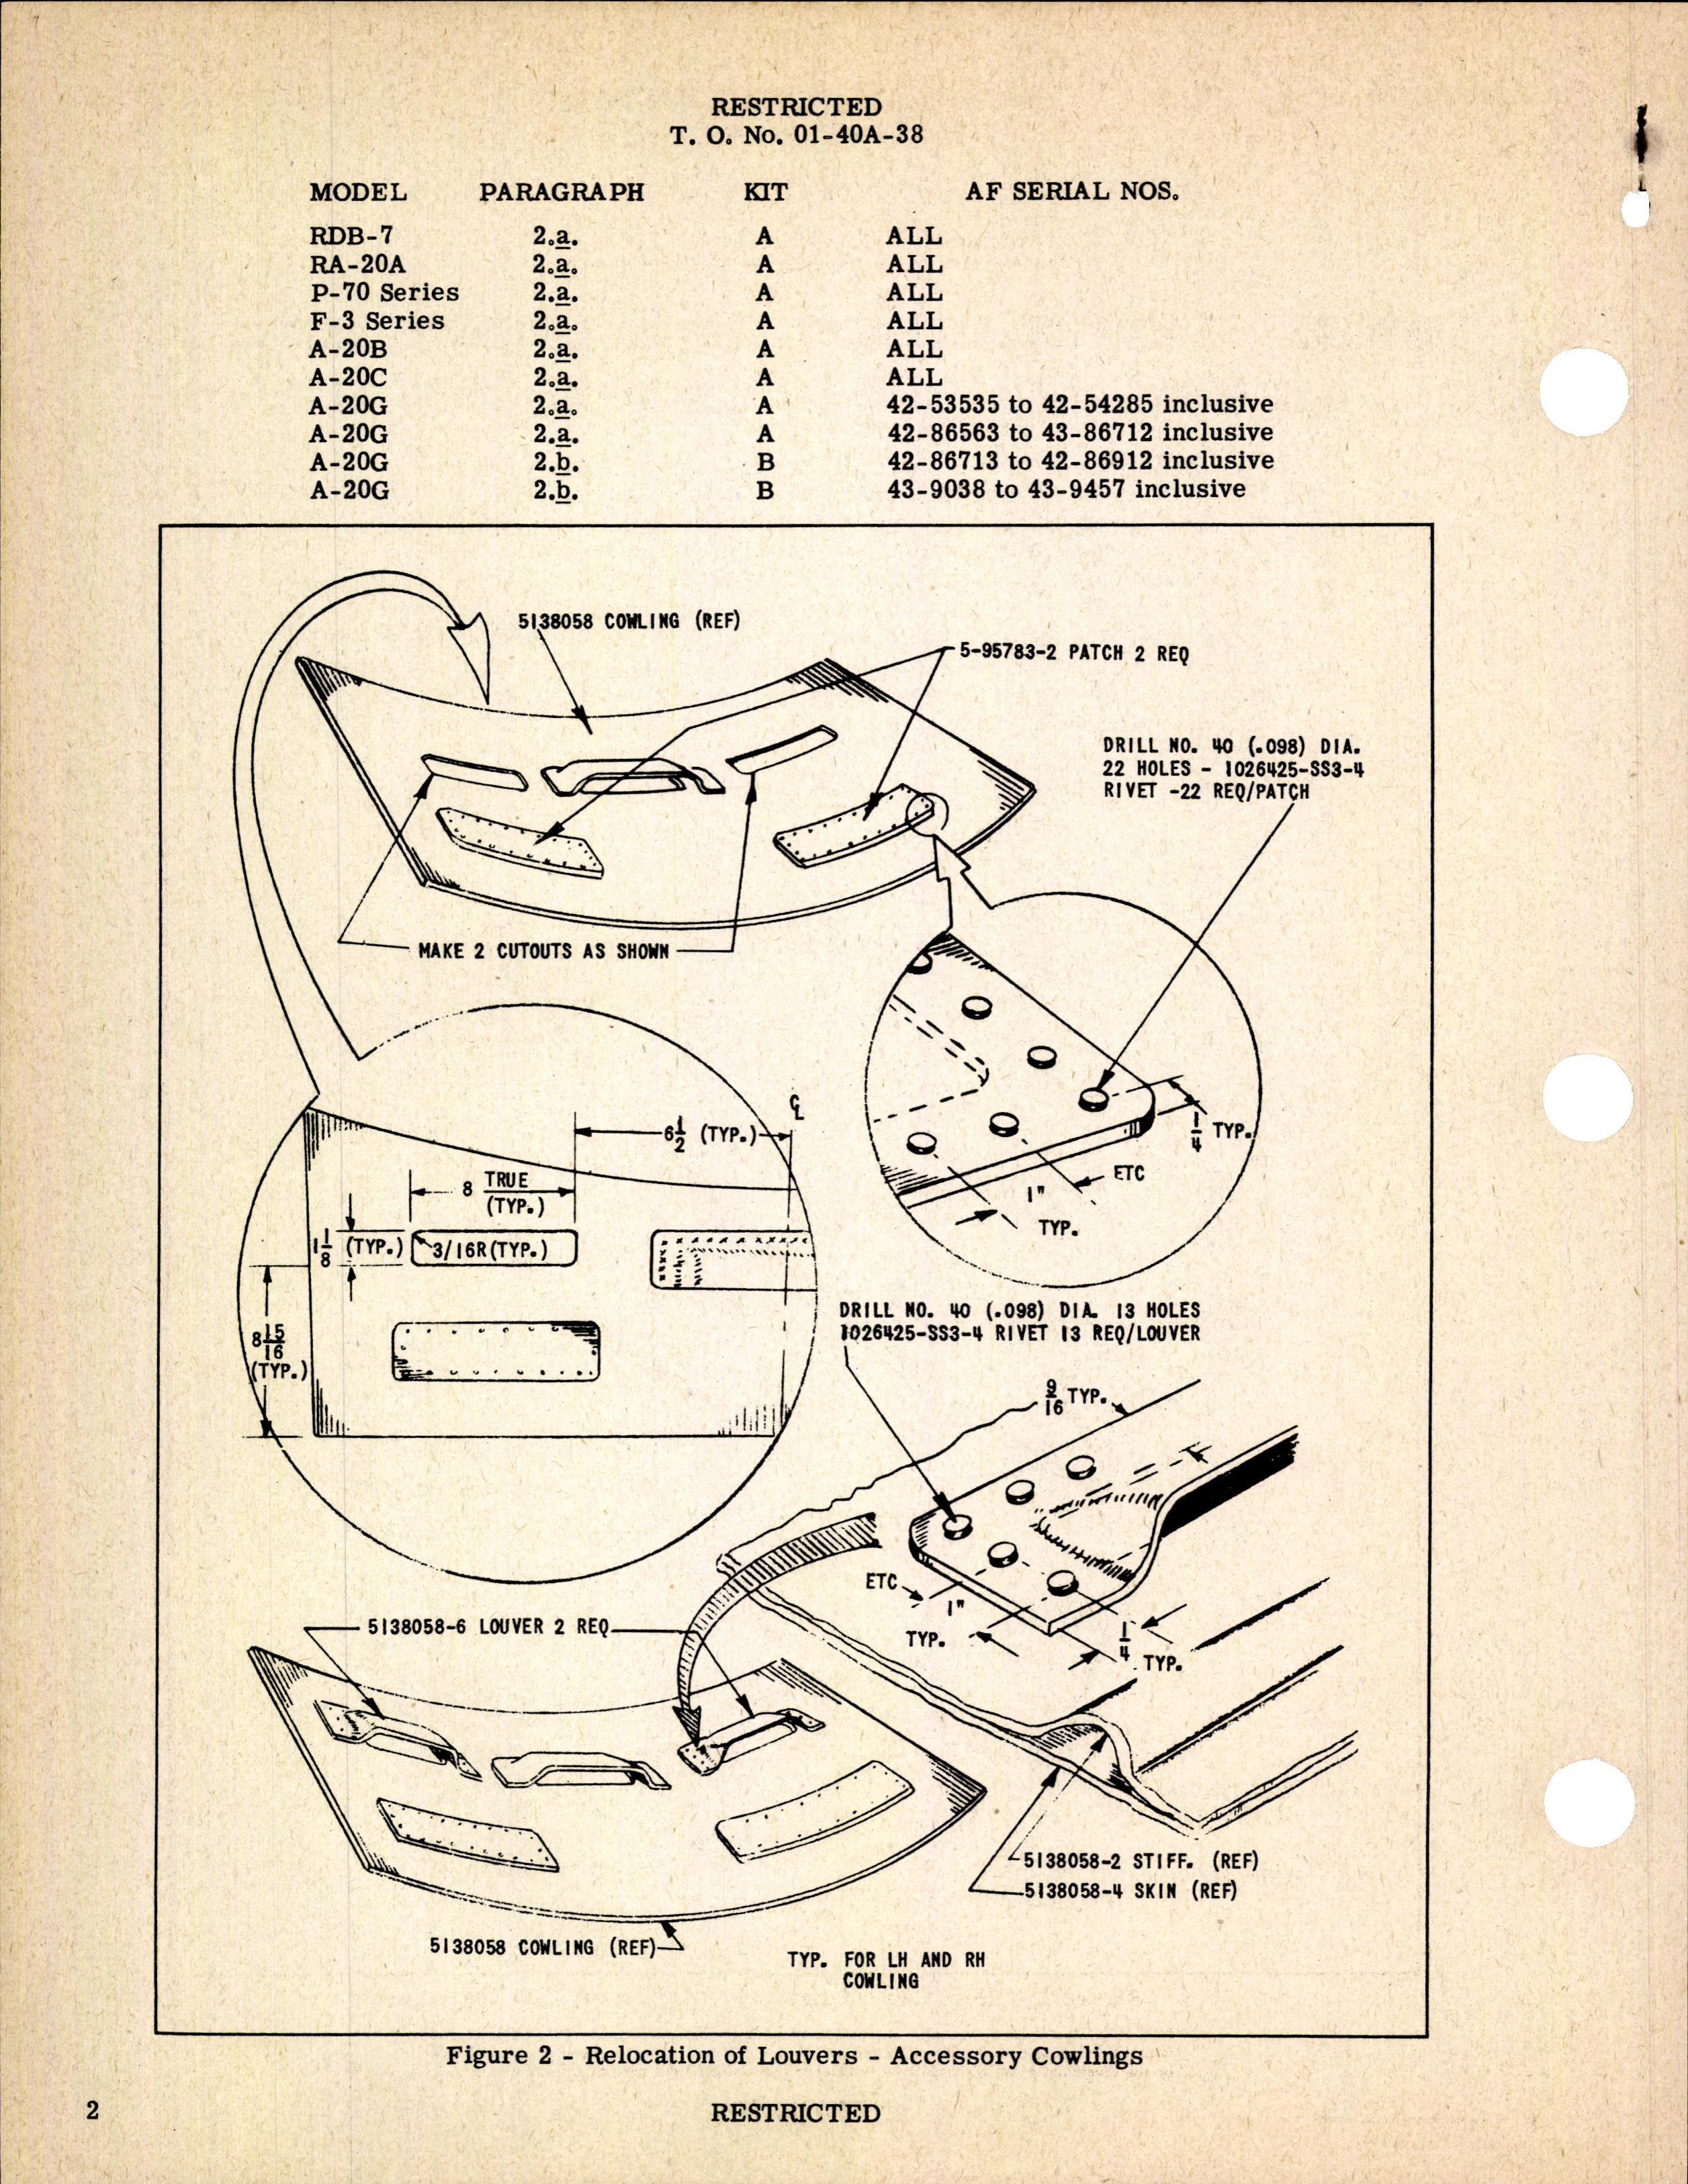 Sample page 2 from AirCorps Library document: Rework of Accessory Cowling Deflector Assembly for A-20, P-70, F-3, and RDB-7 Series